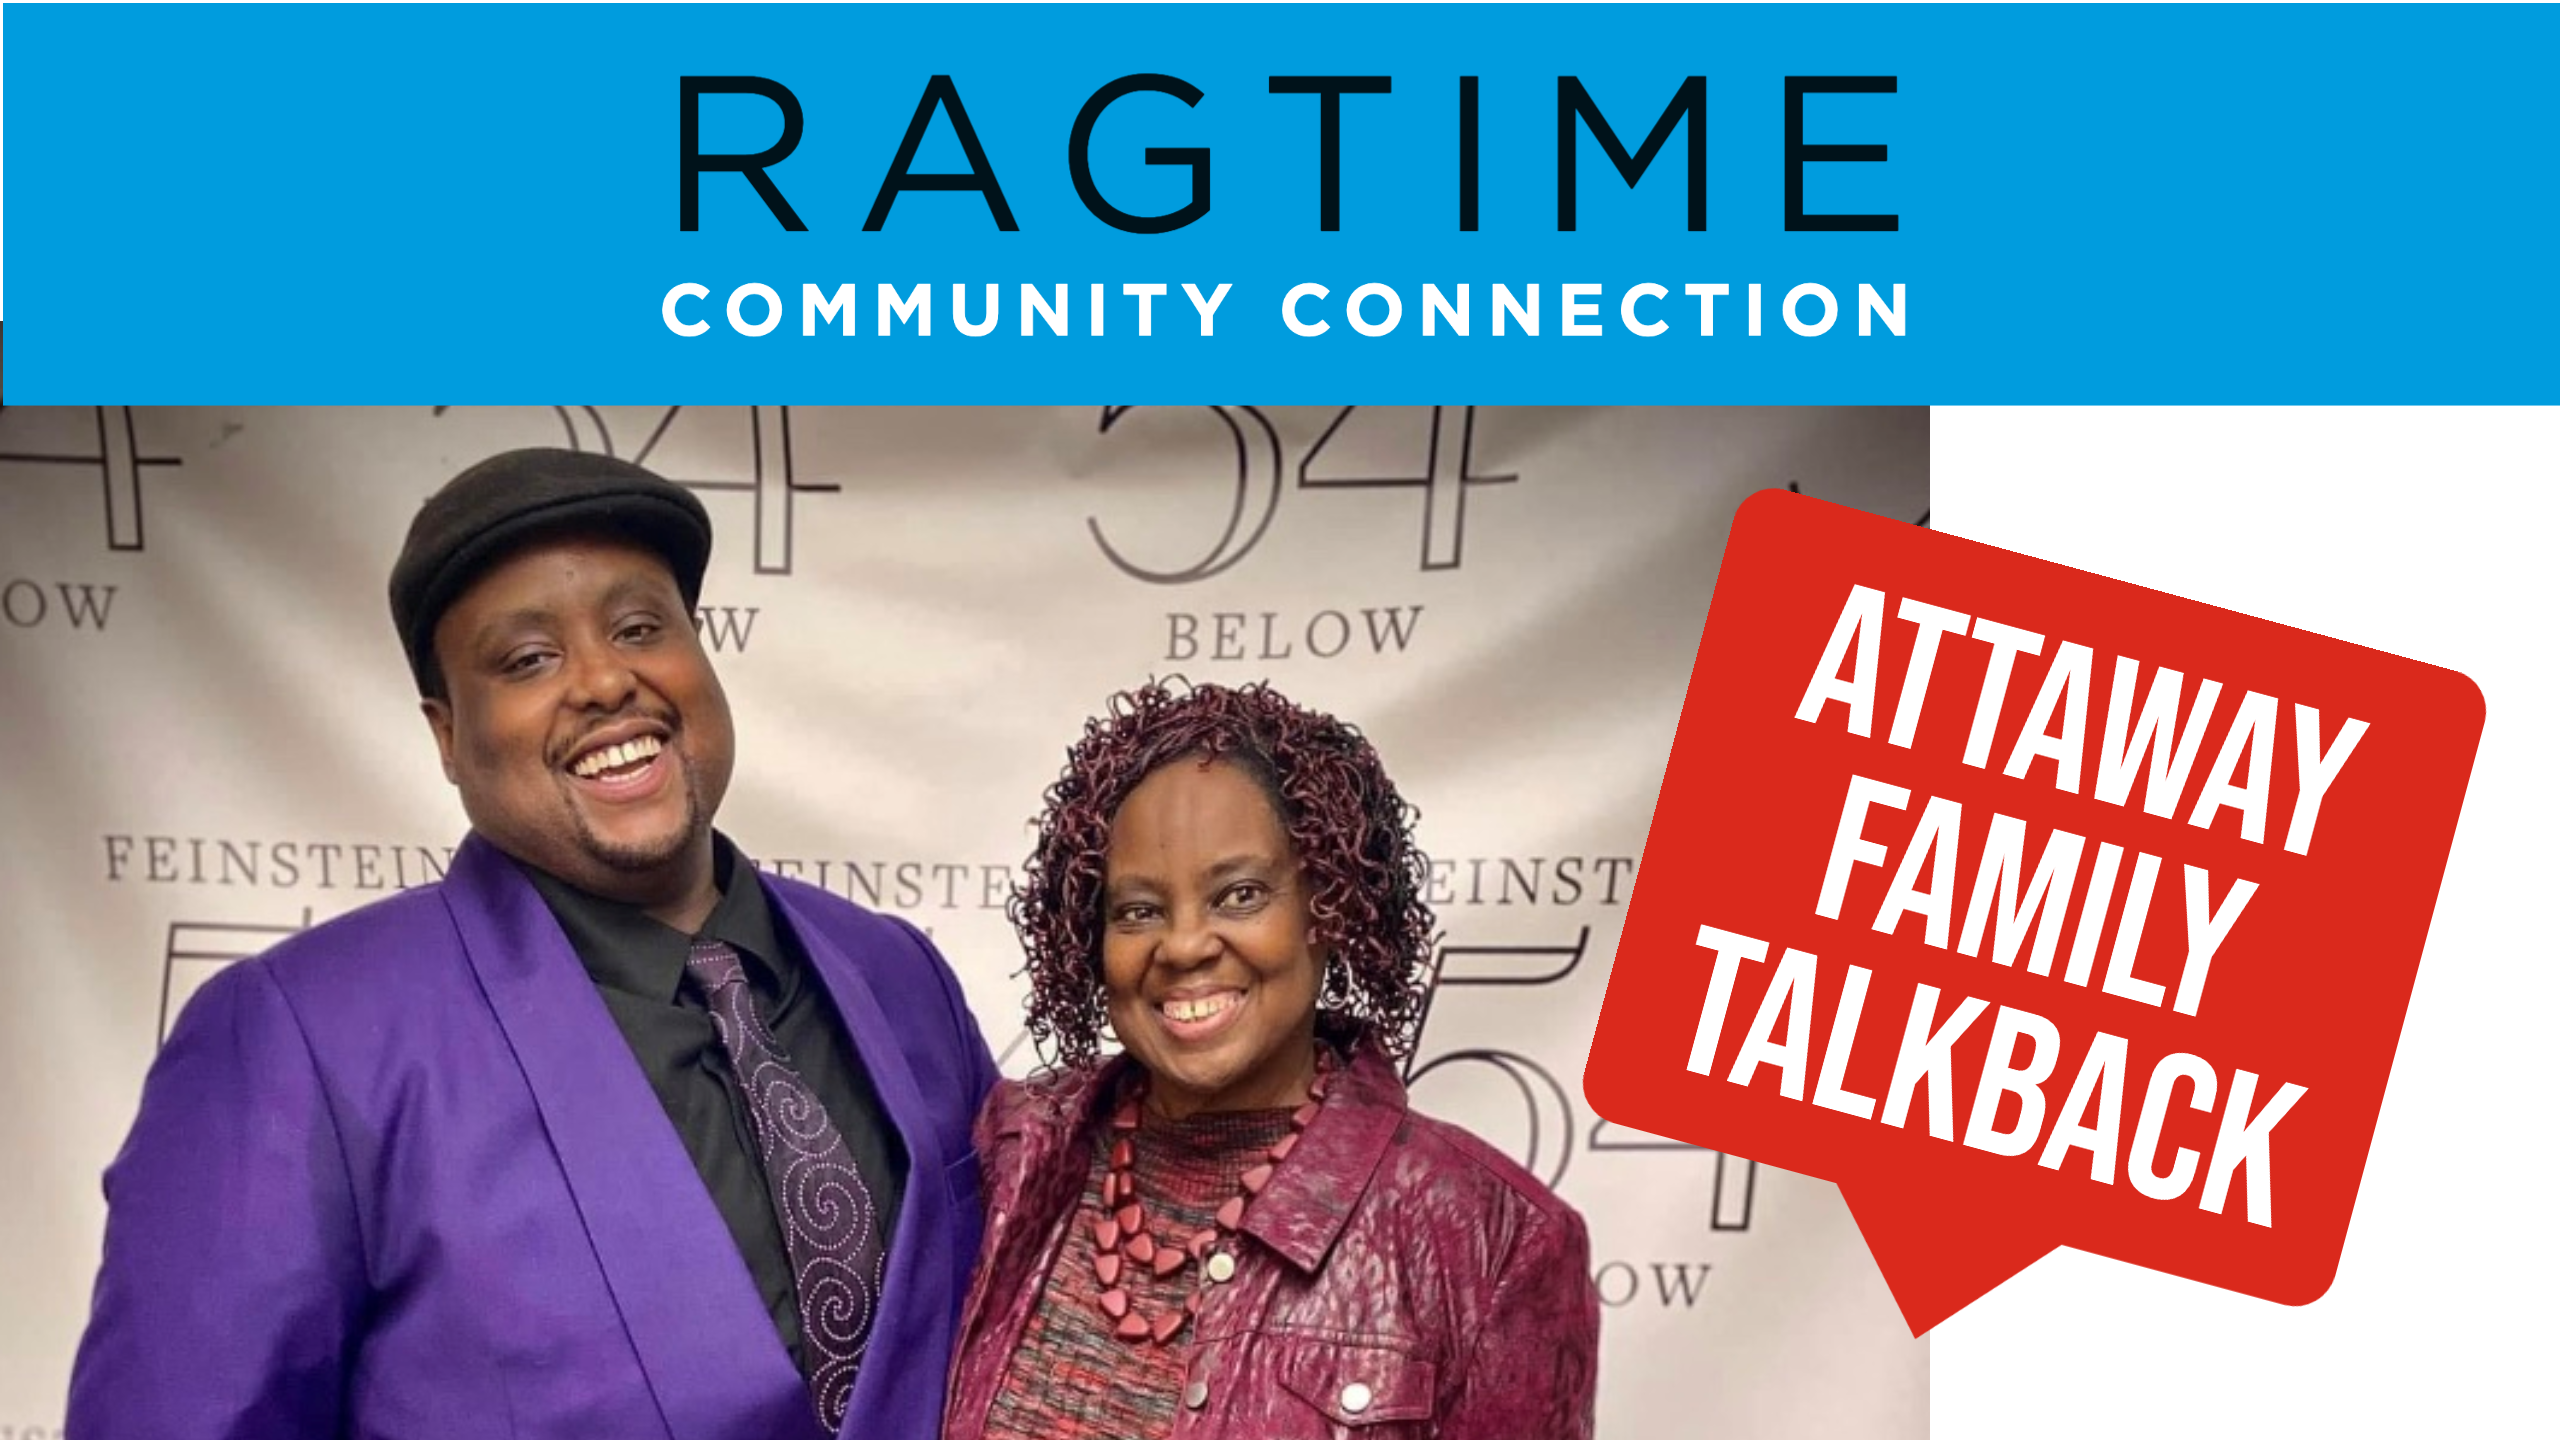 Ragtime Community Connection - Attaway Family Talkback